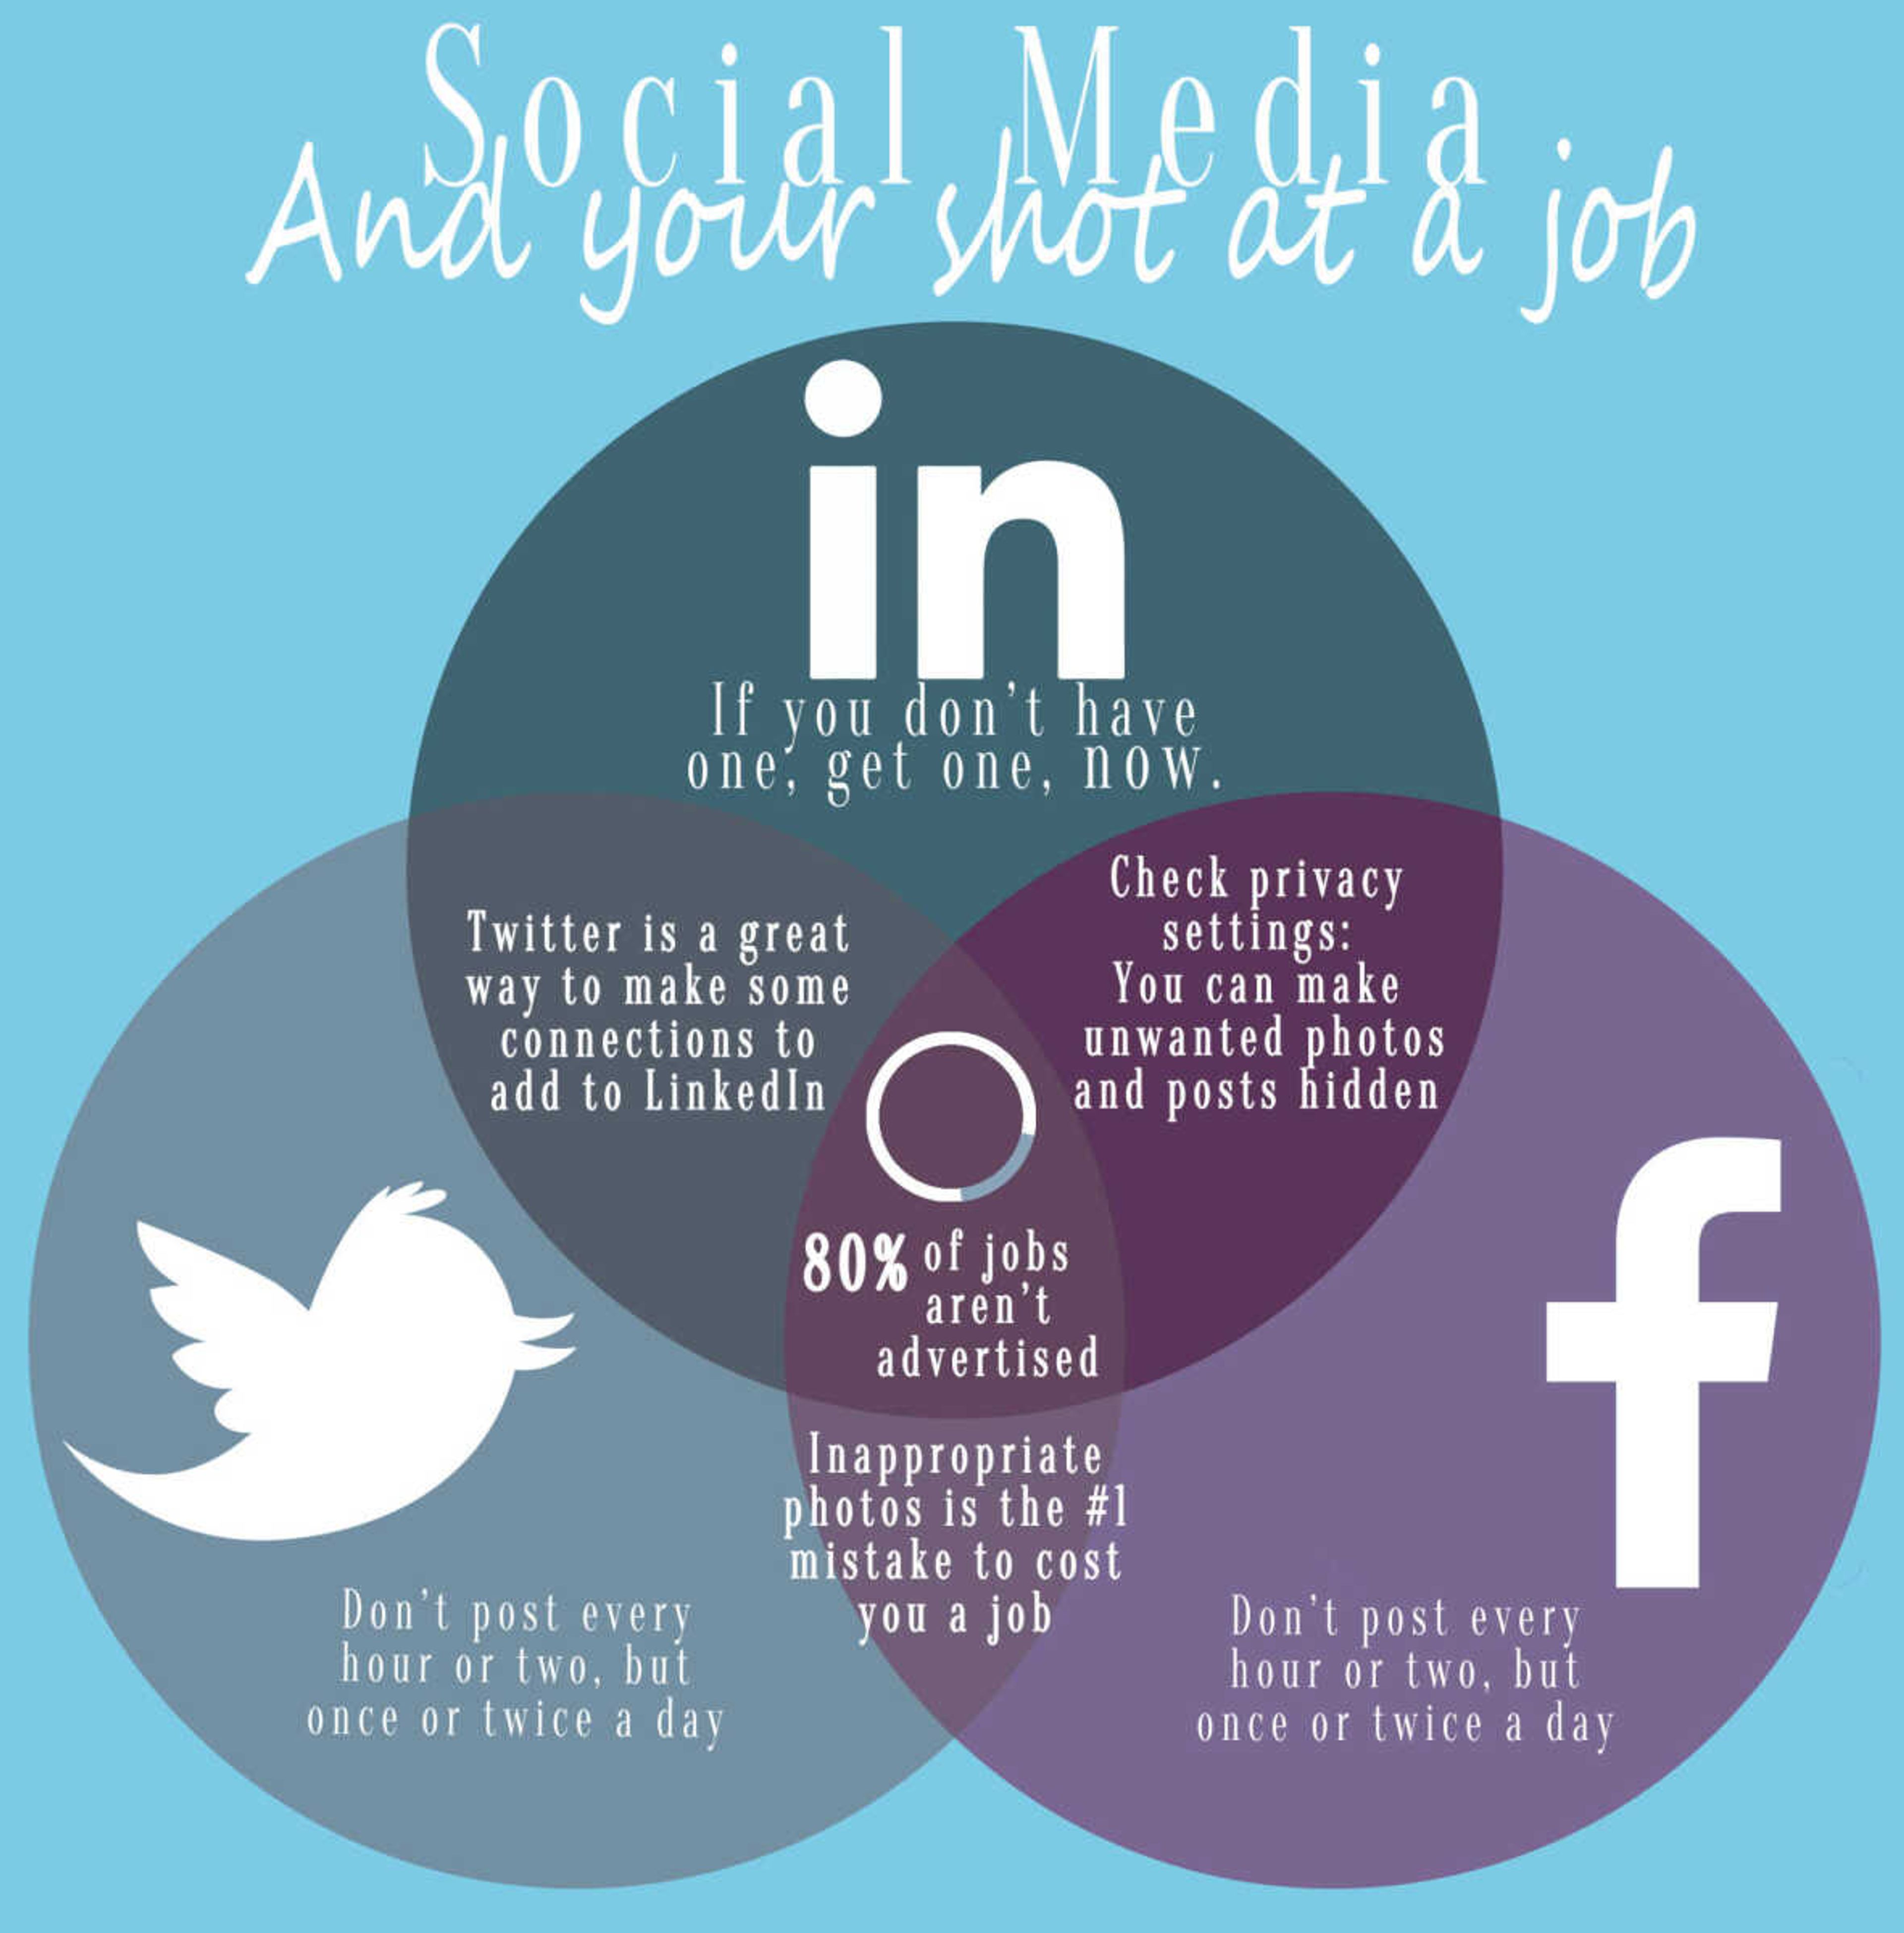 Infographic by Katy Hooper